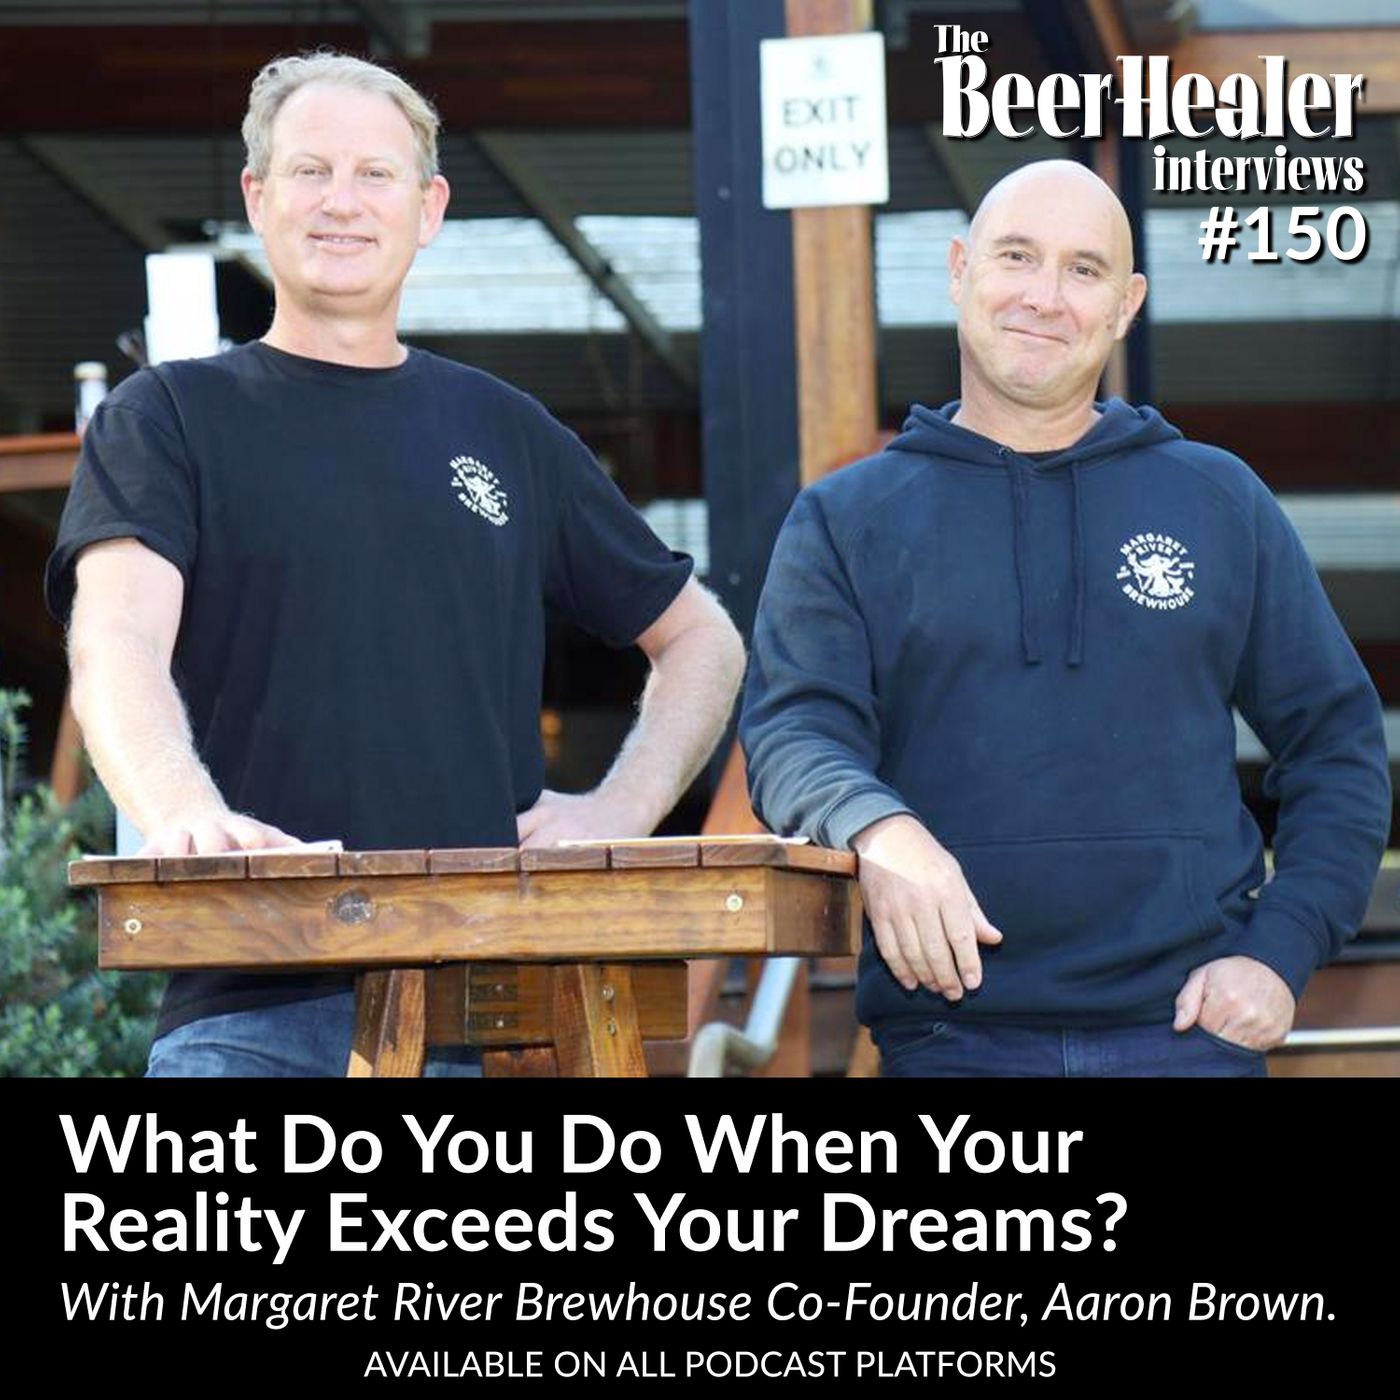 Ep. 150 - What Do You Do When Your Reality Exceeds Your Dreams? With Margaret River Brewhouse Co-Founder, Aaron Brown.